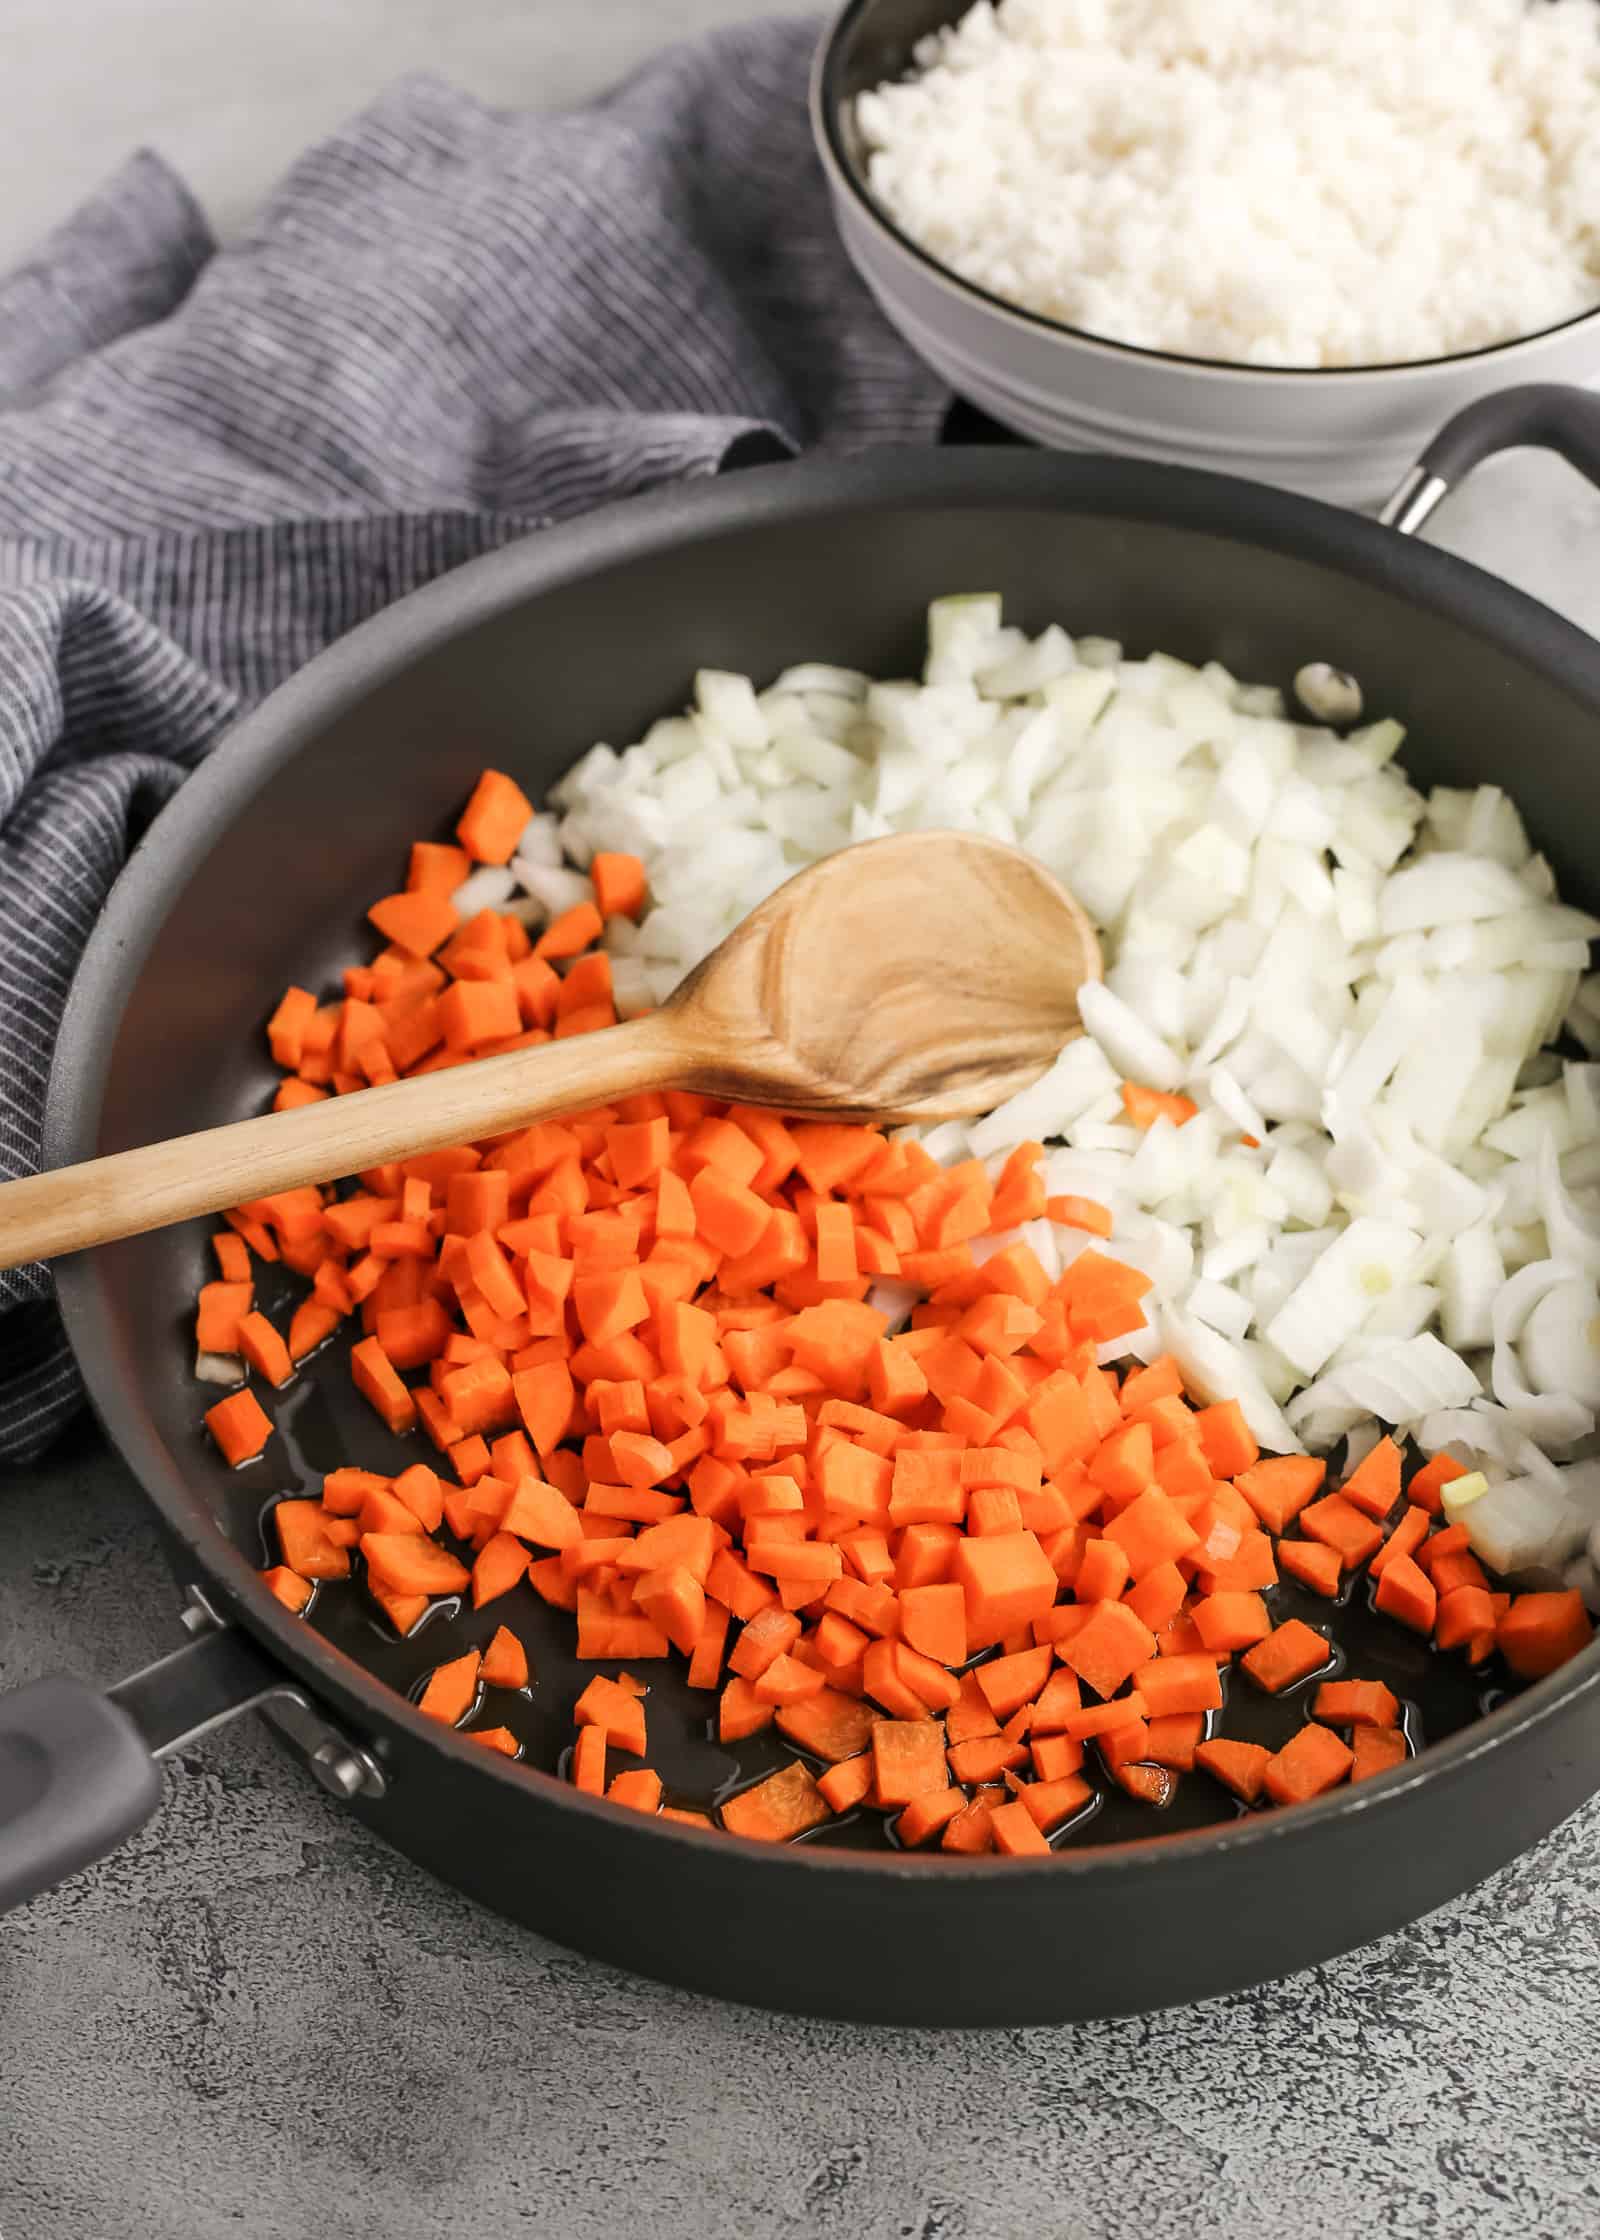 Large skillet with chopped carrots and diced onions, appearing ready to be cooked on a stovetop with a small amount of oil added to the pan